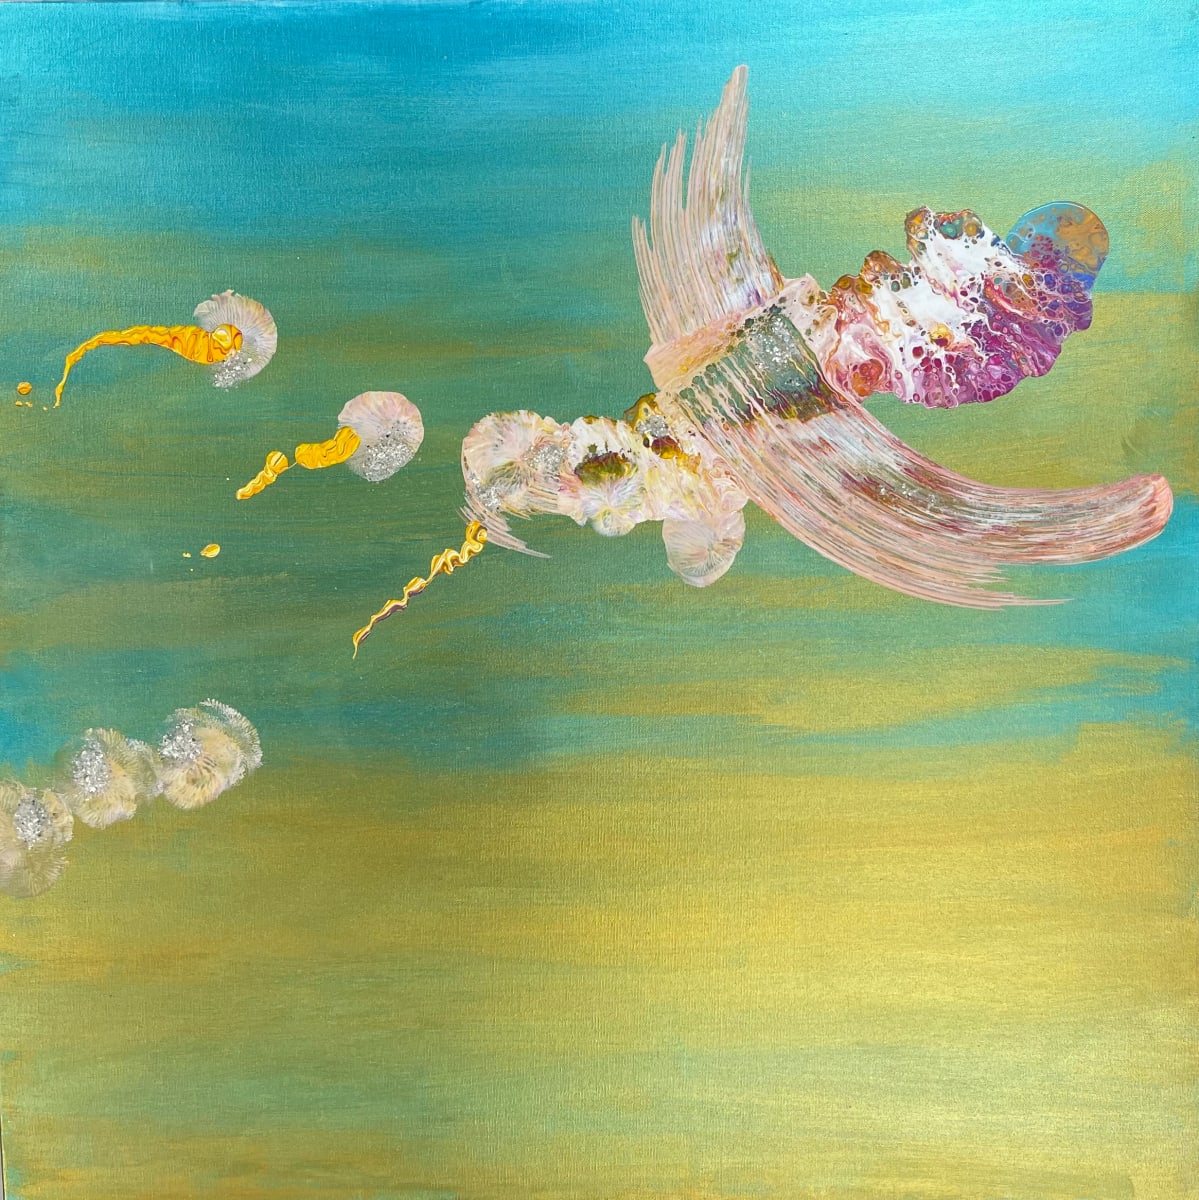 Fly away, fly away. by Bonnie Levinson 